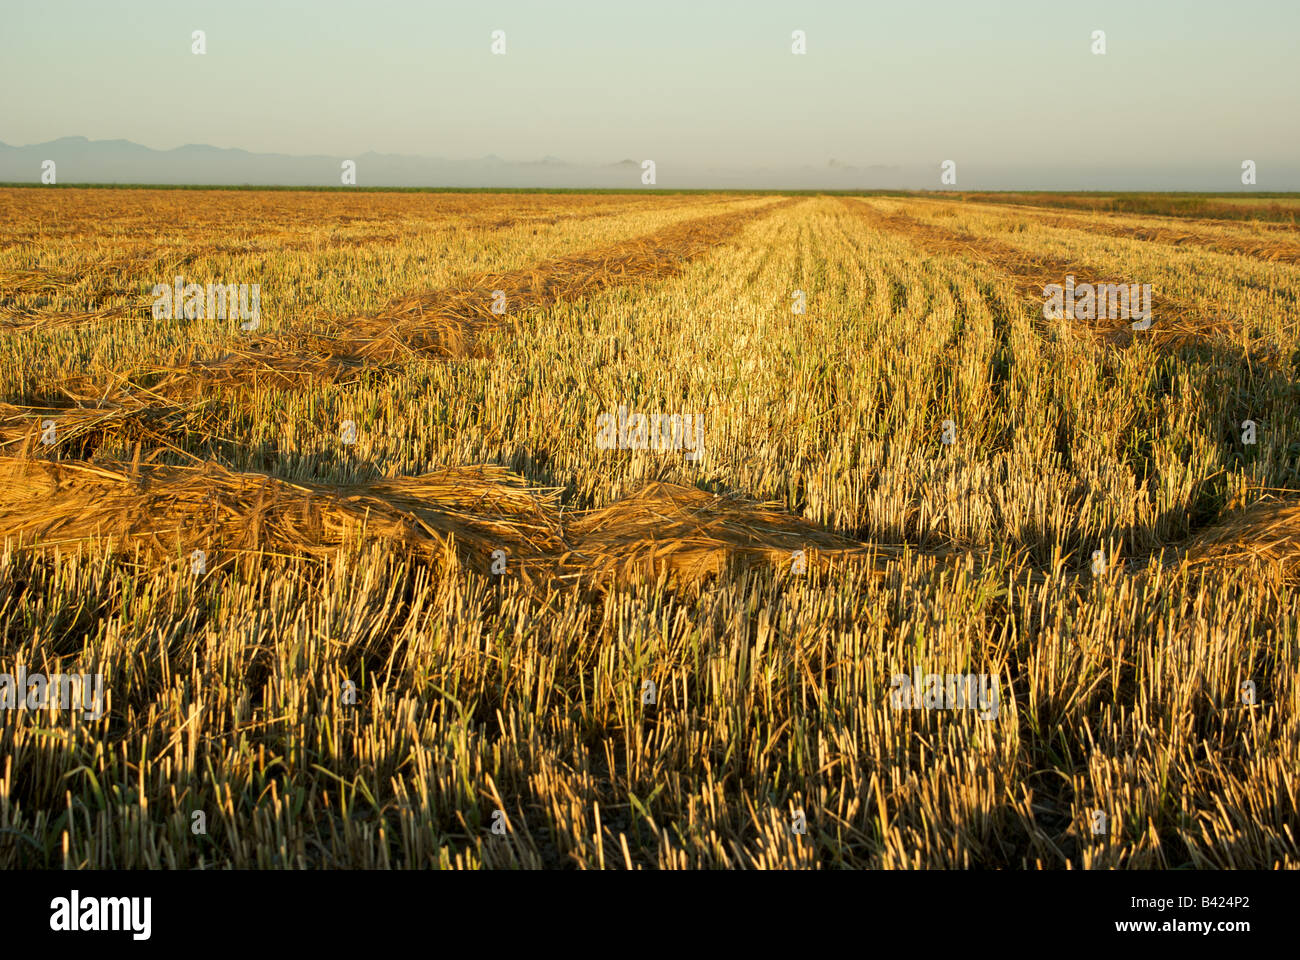 Rows of swathed cut barley awaiting combining Stock Photo